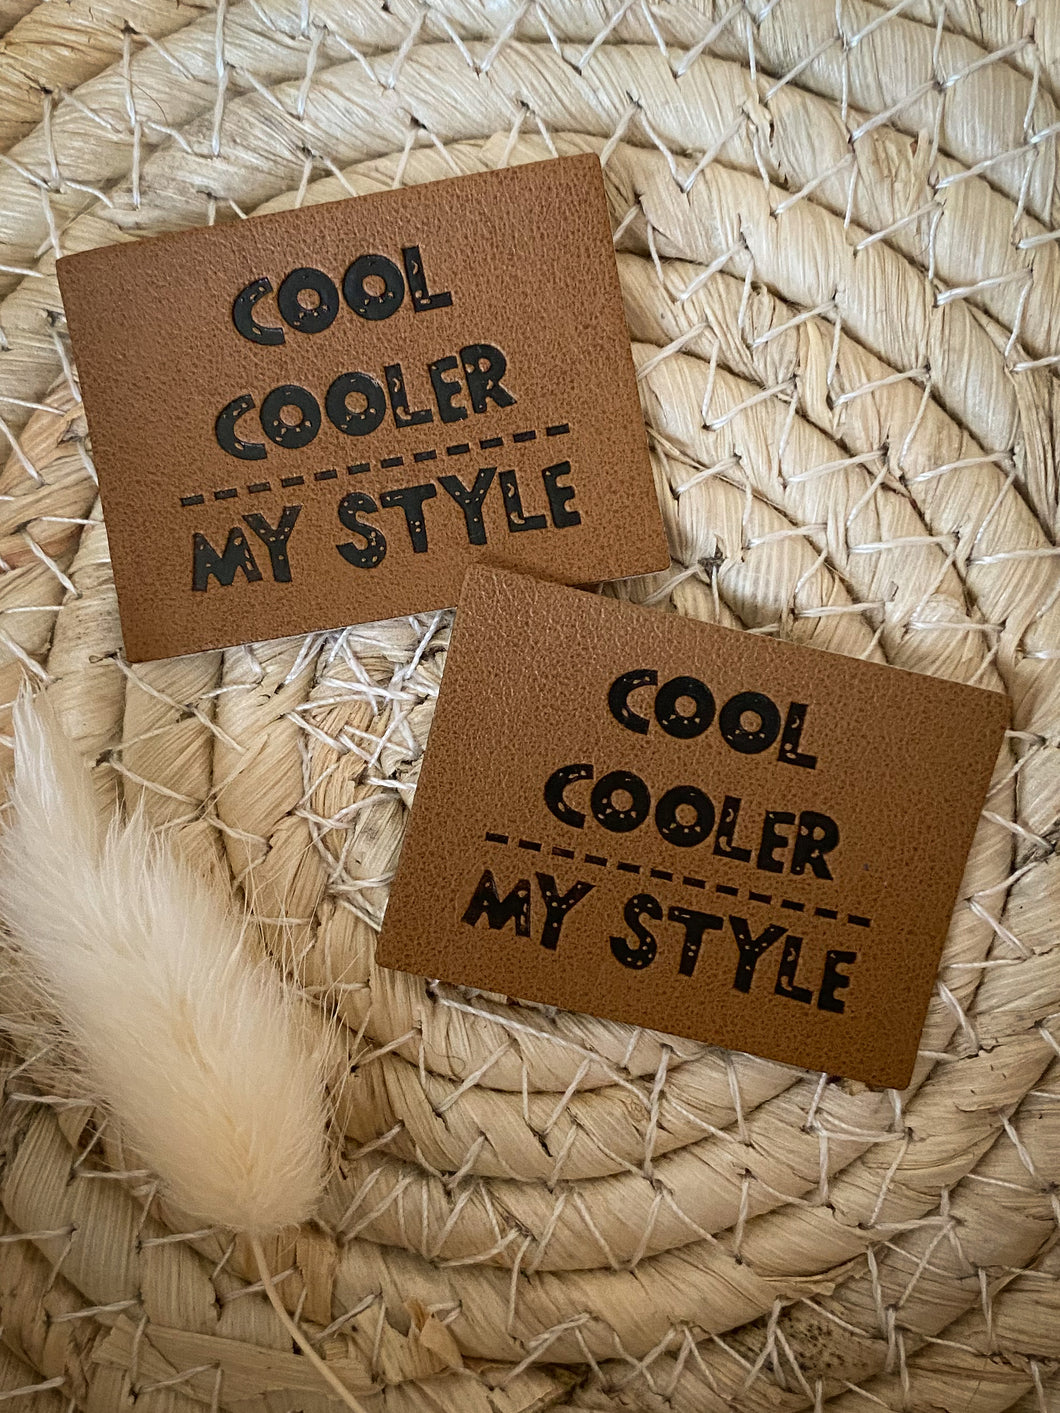 Cool Cooler My Style Label